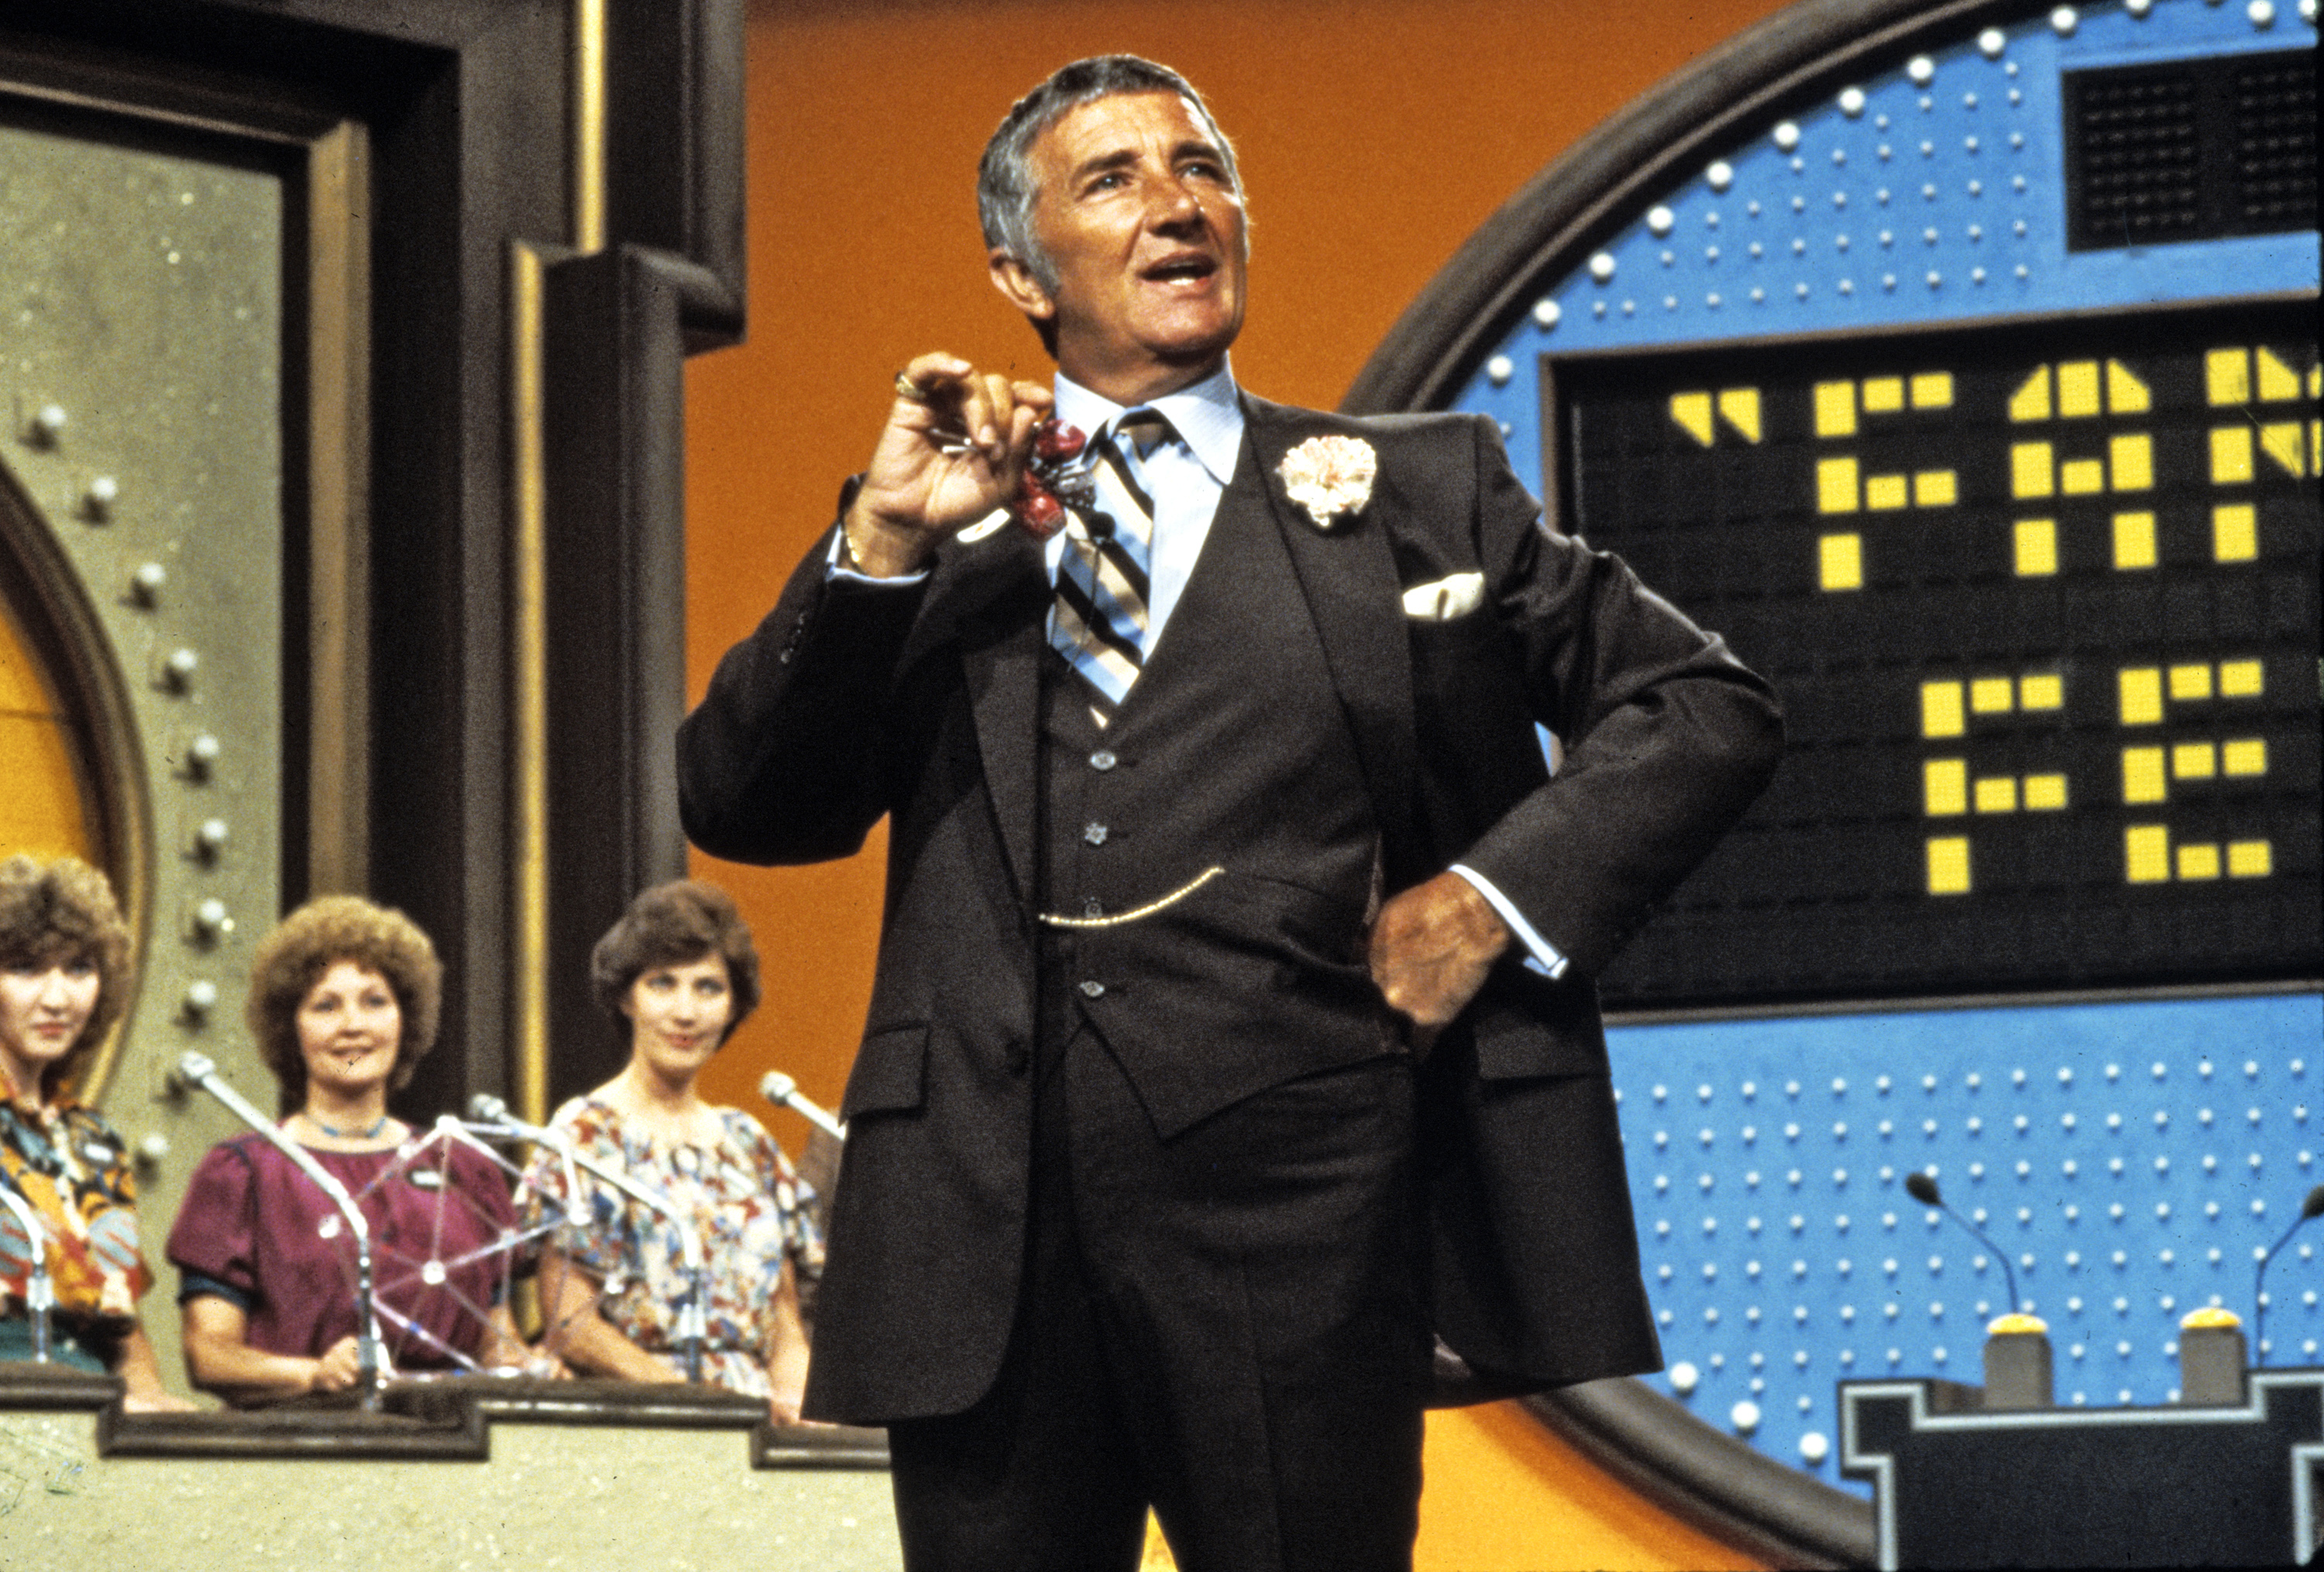 Family Feud: The Richard Dawson Game Show Debuted 40 Years Ago - canceled TV shows ...3000 x 2029